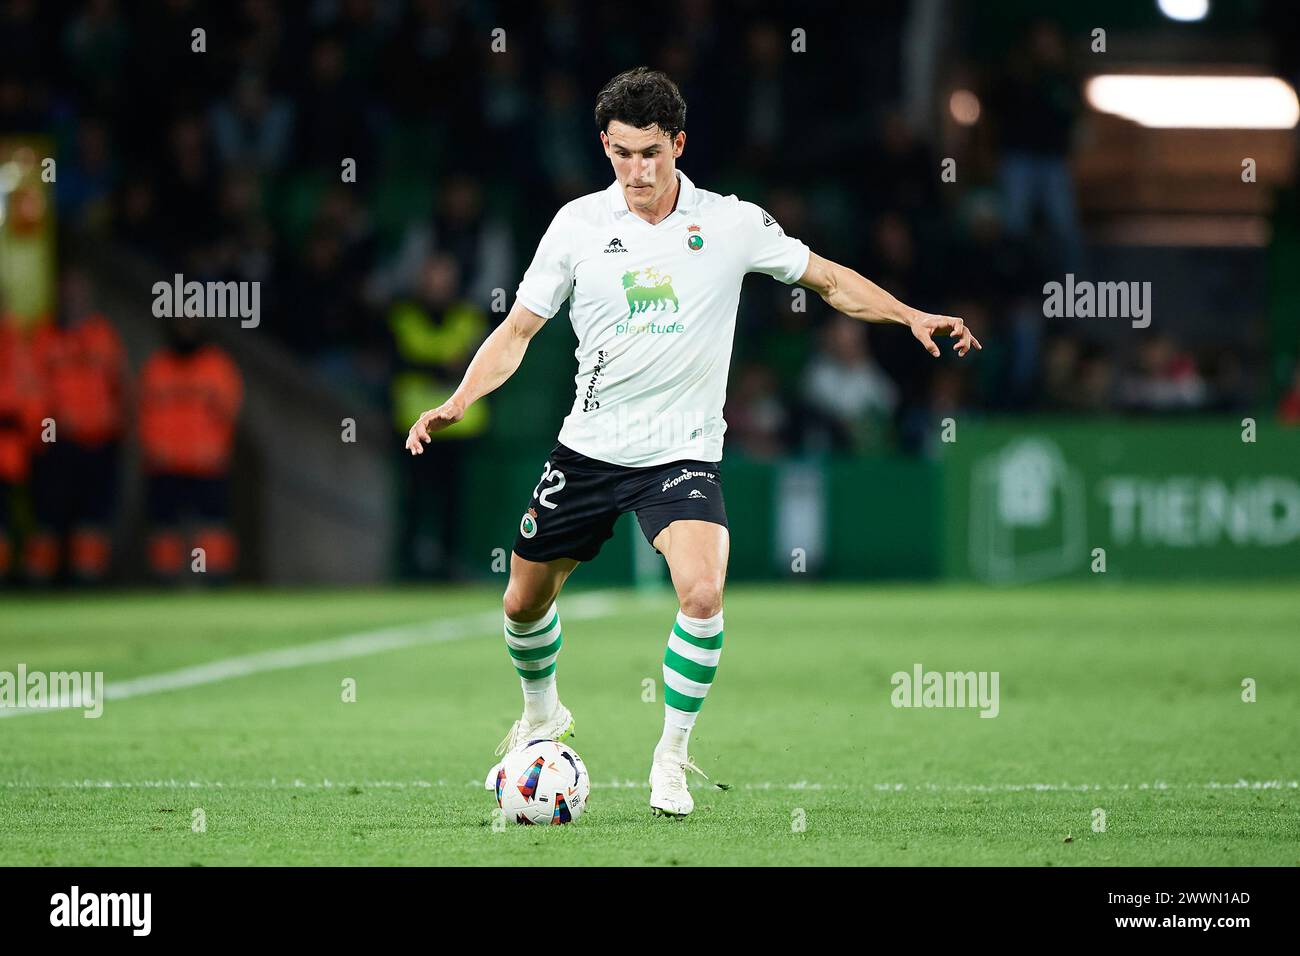 Juan Gutierrez of Real Racing Club with the ball during the LaLiga Hypermotion match between Real Racing Club and CD Eldense at El Sardinero Stadium o Stock Photo